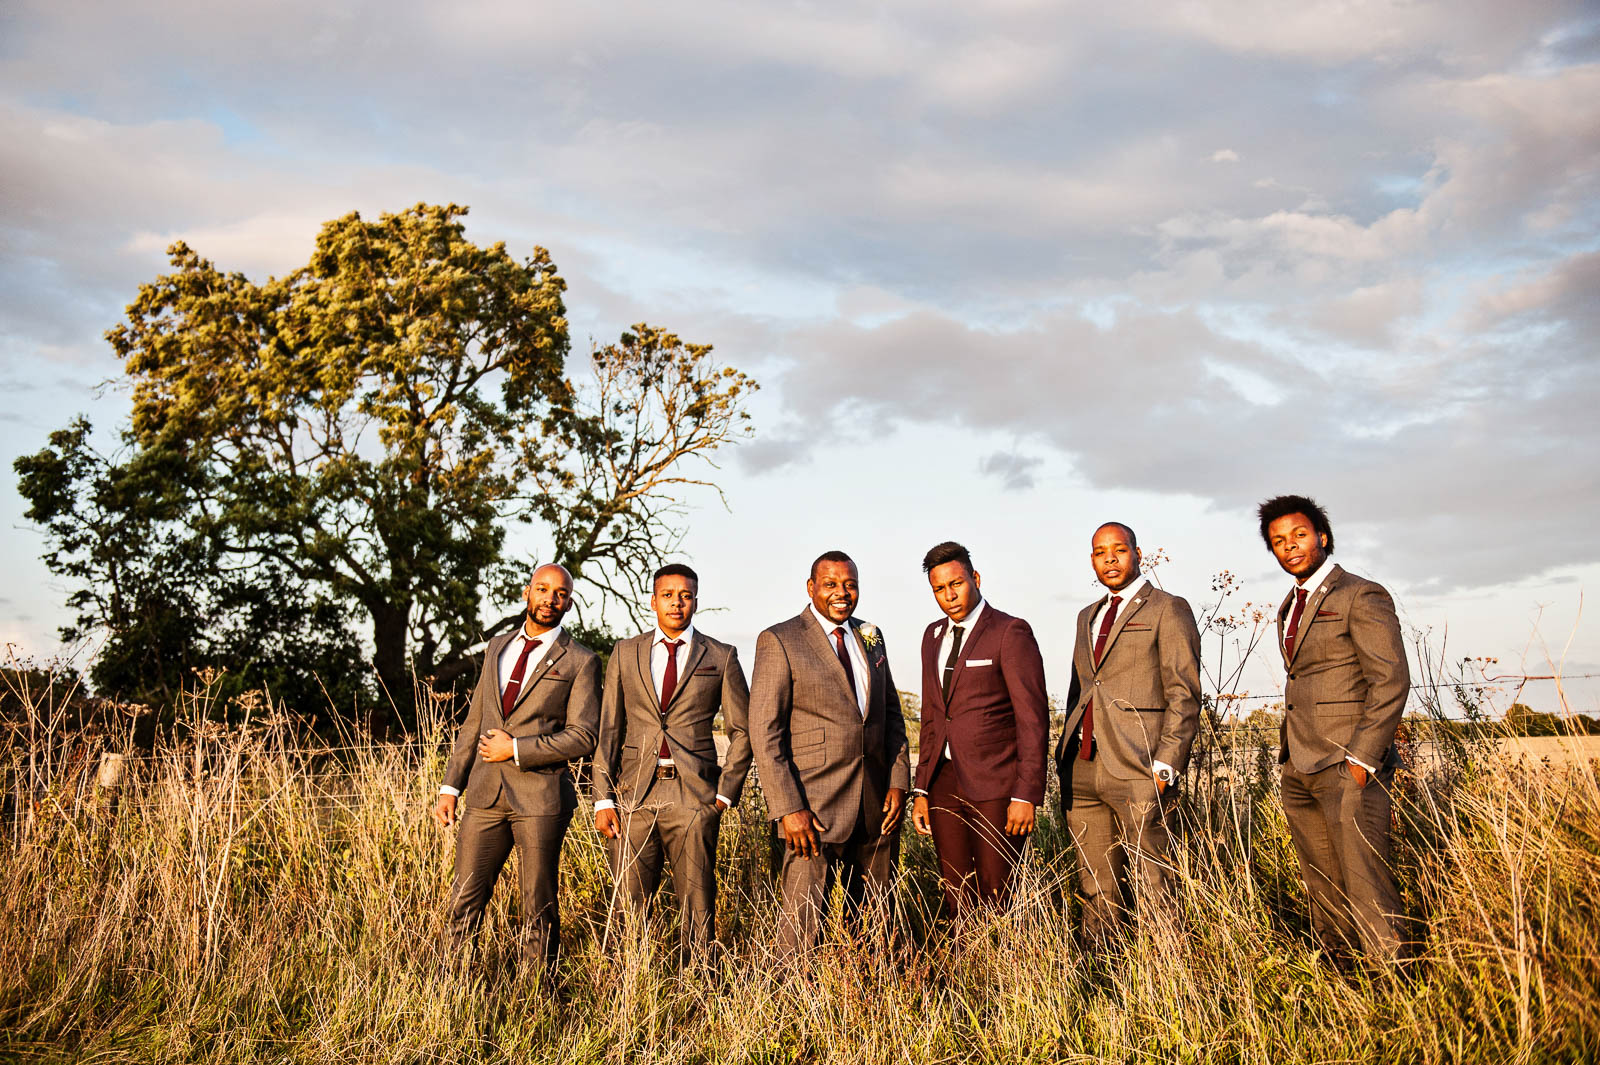 Groomsmen standing in a field with the golden sun shinning on them. 